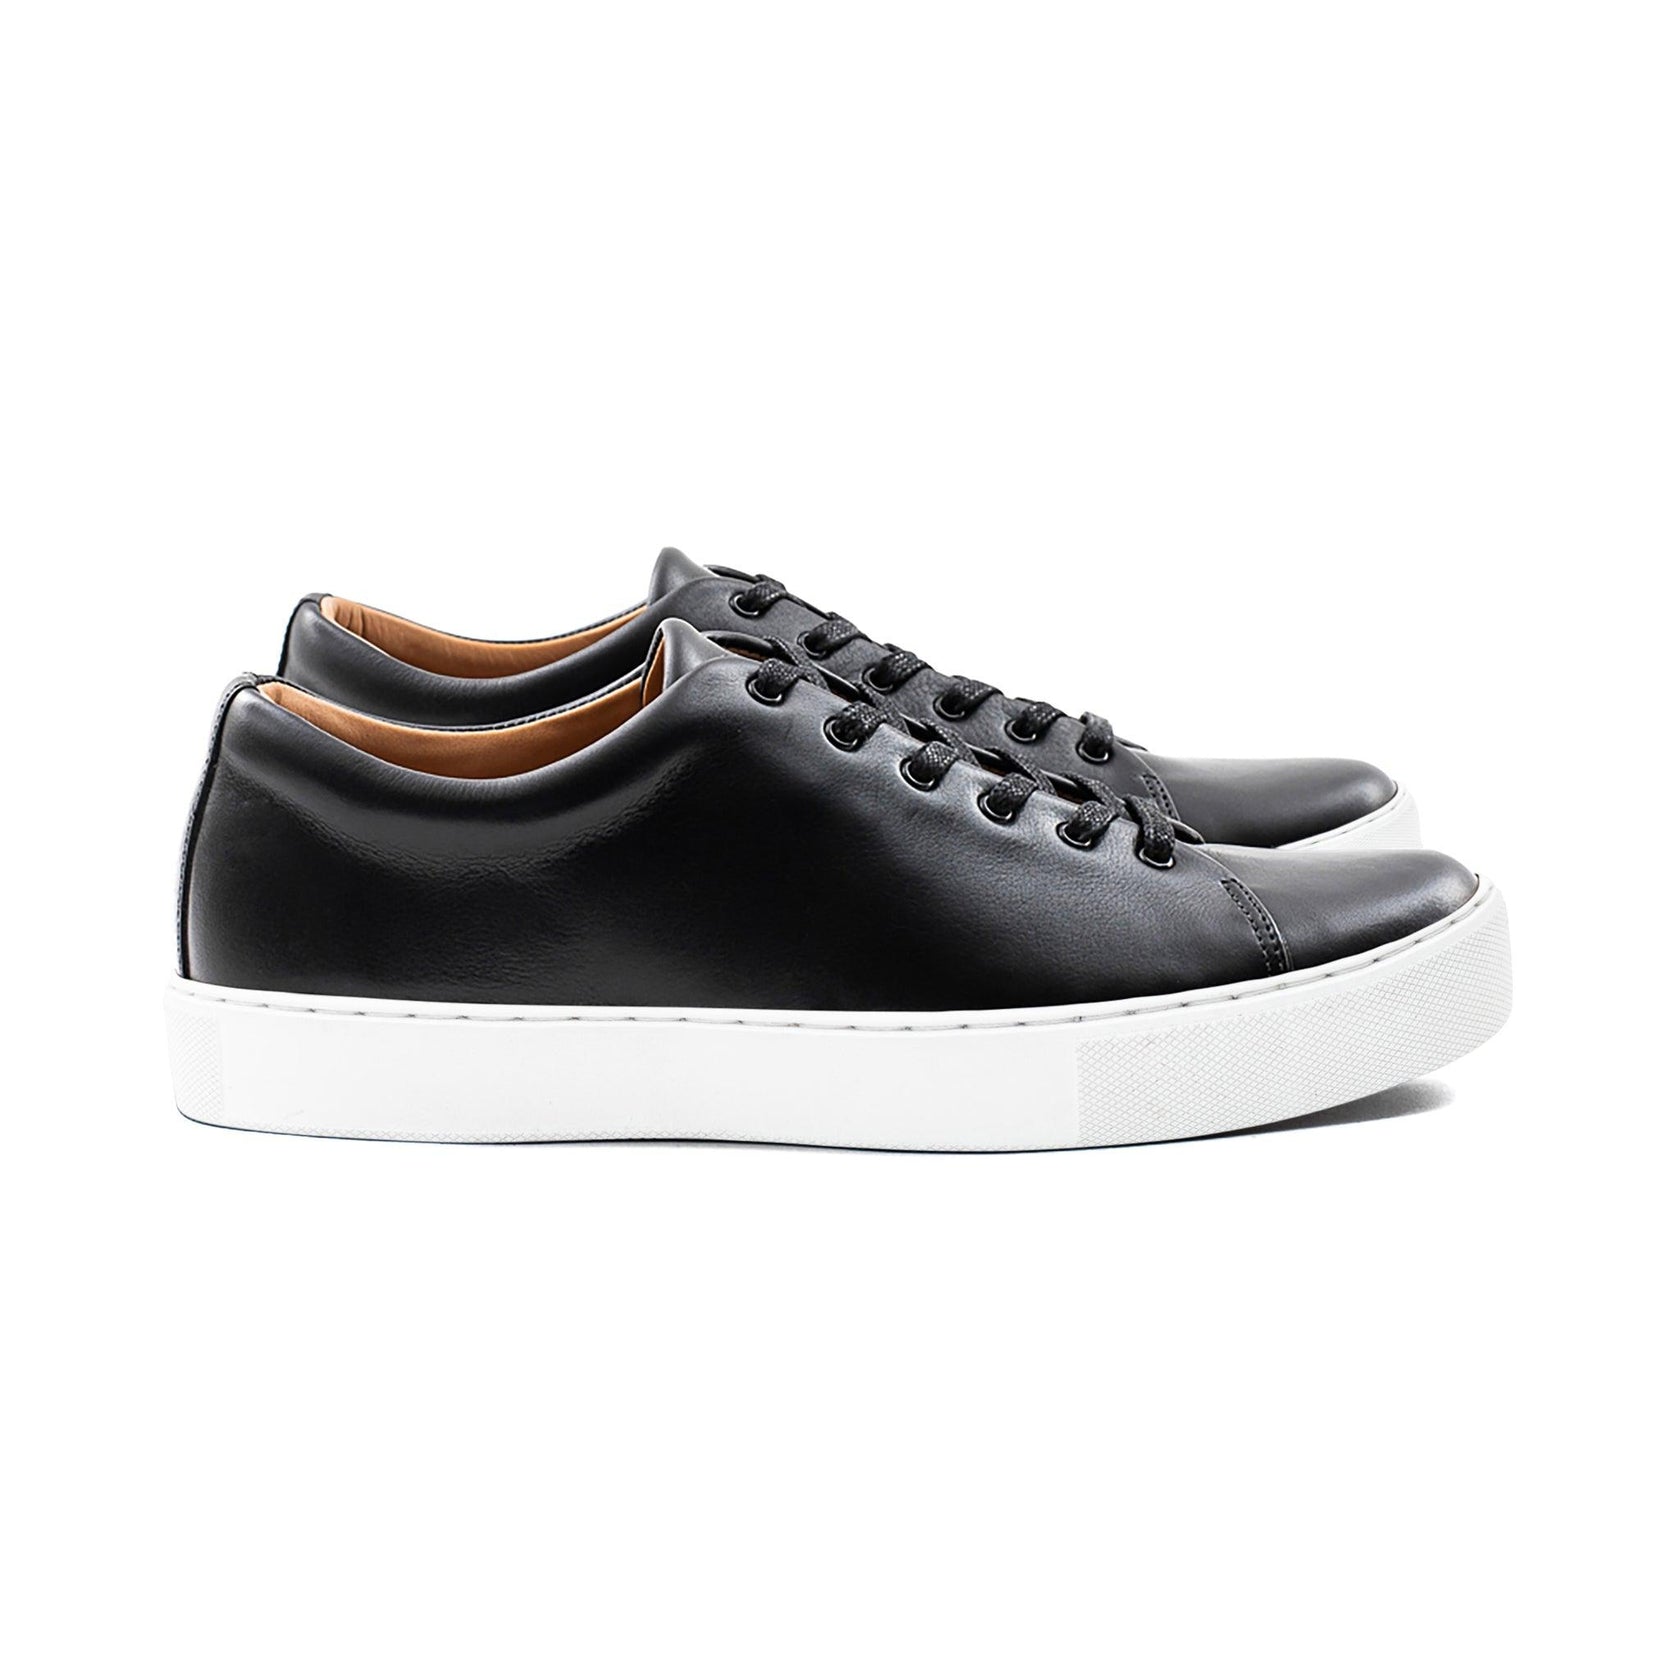 Crown Northampton Overstone Derby - Black Calf Leather Sneakers